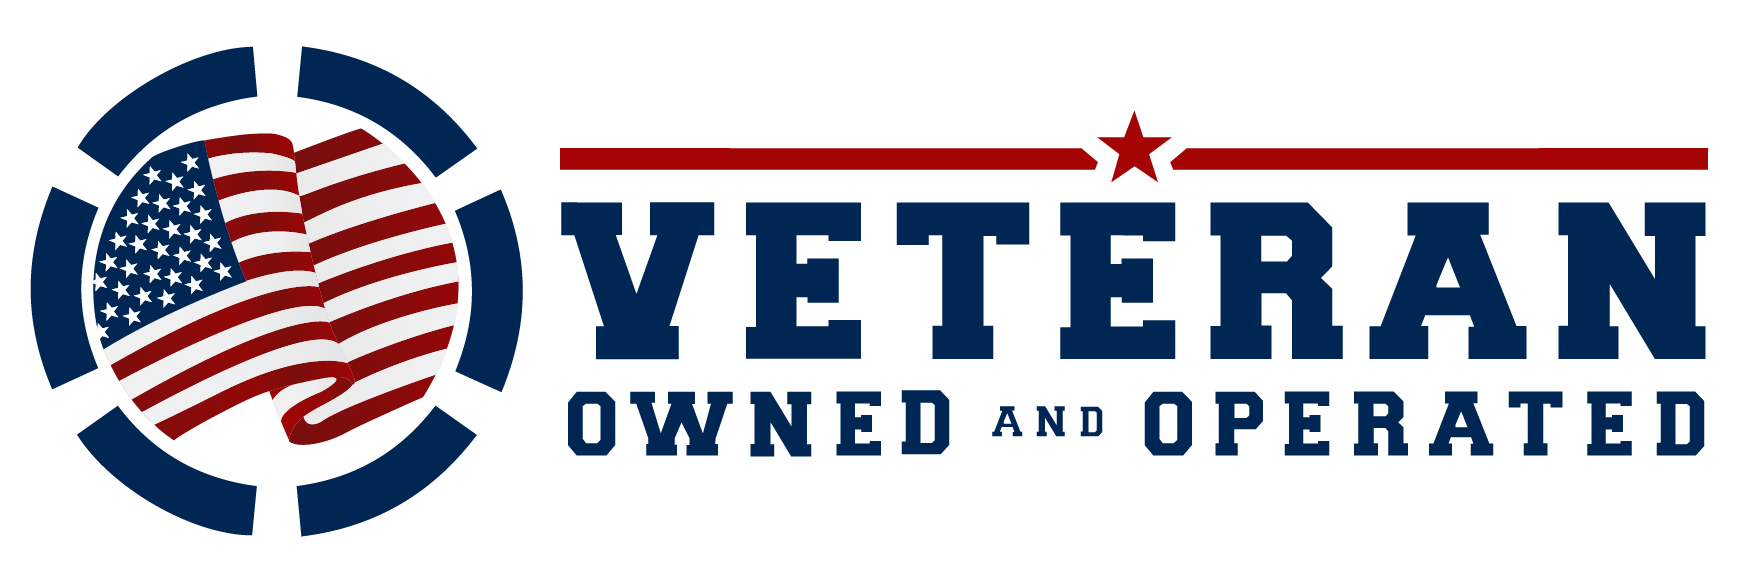 Stateline Gutters is a veteran owned and operated business.